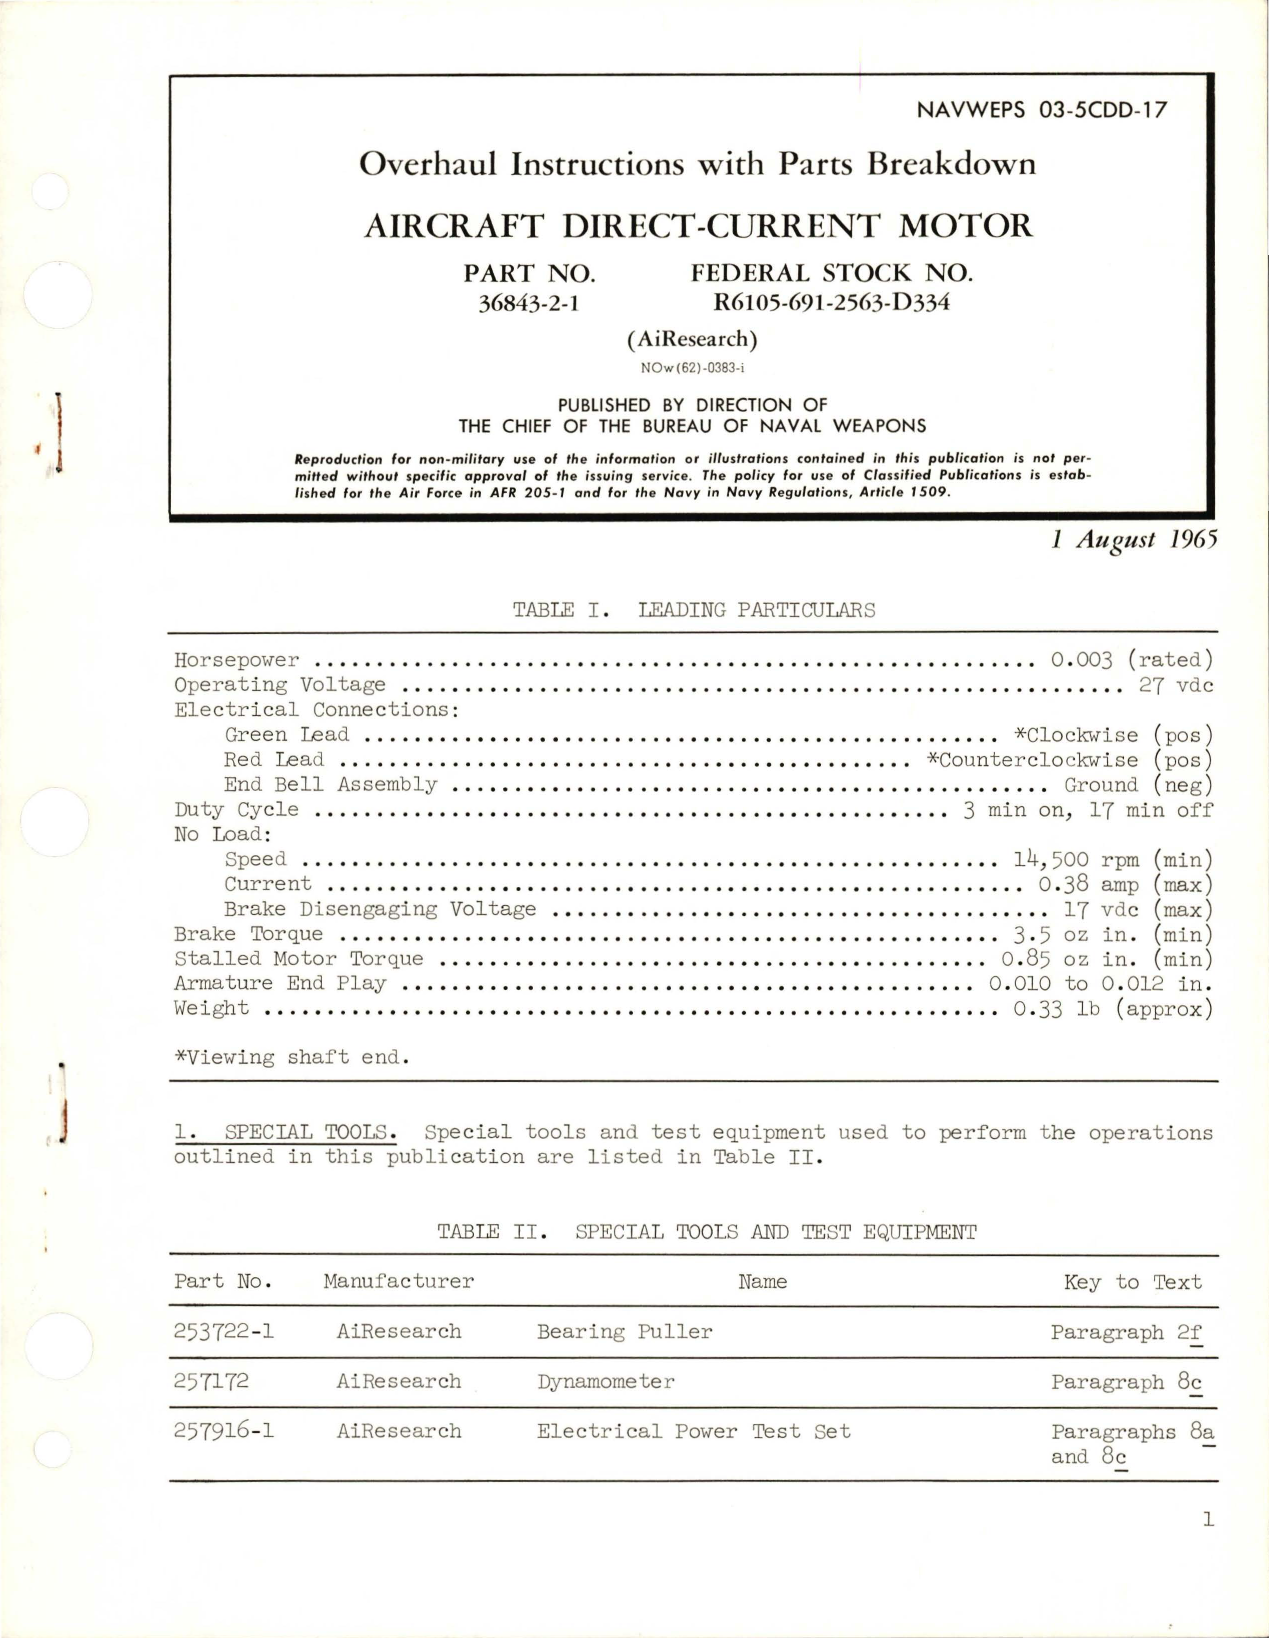 Sample page 1 from AirCorps Library document: Overhaul Instructions with Parts Breakdown for Direct Current Motor - Part 36843-2-1